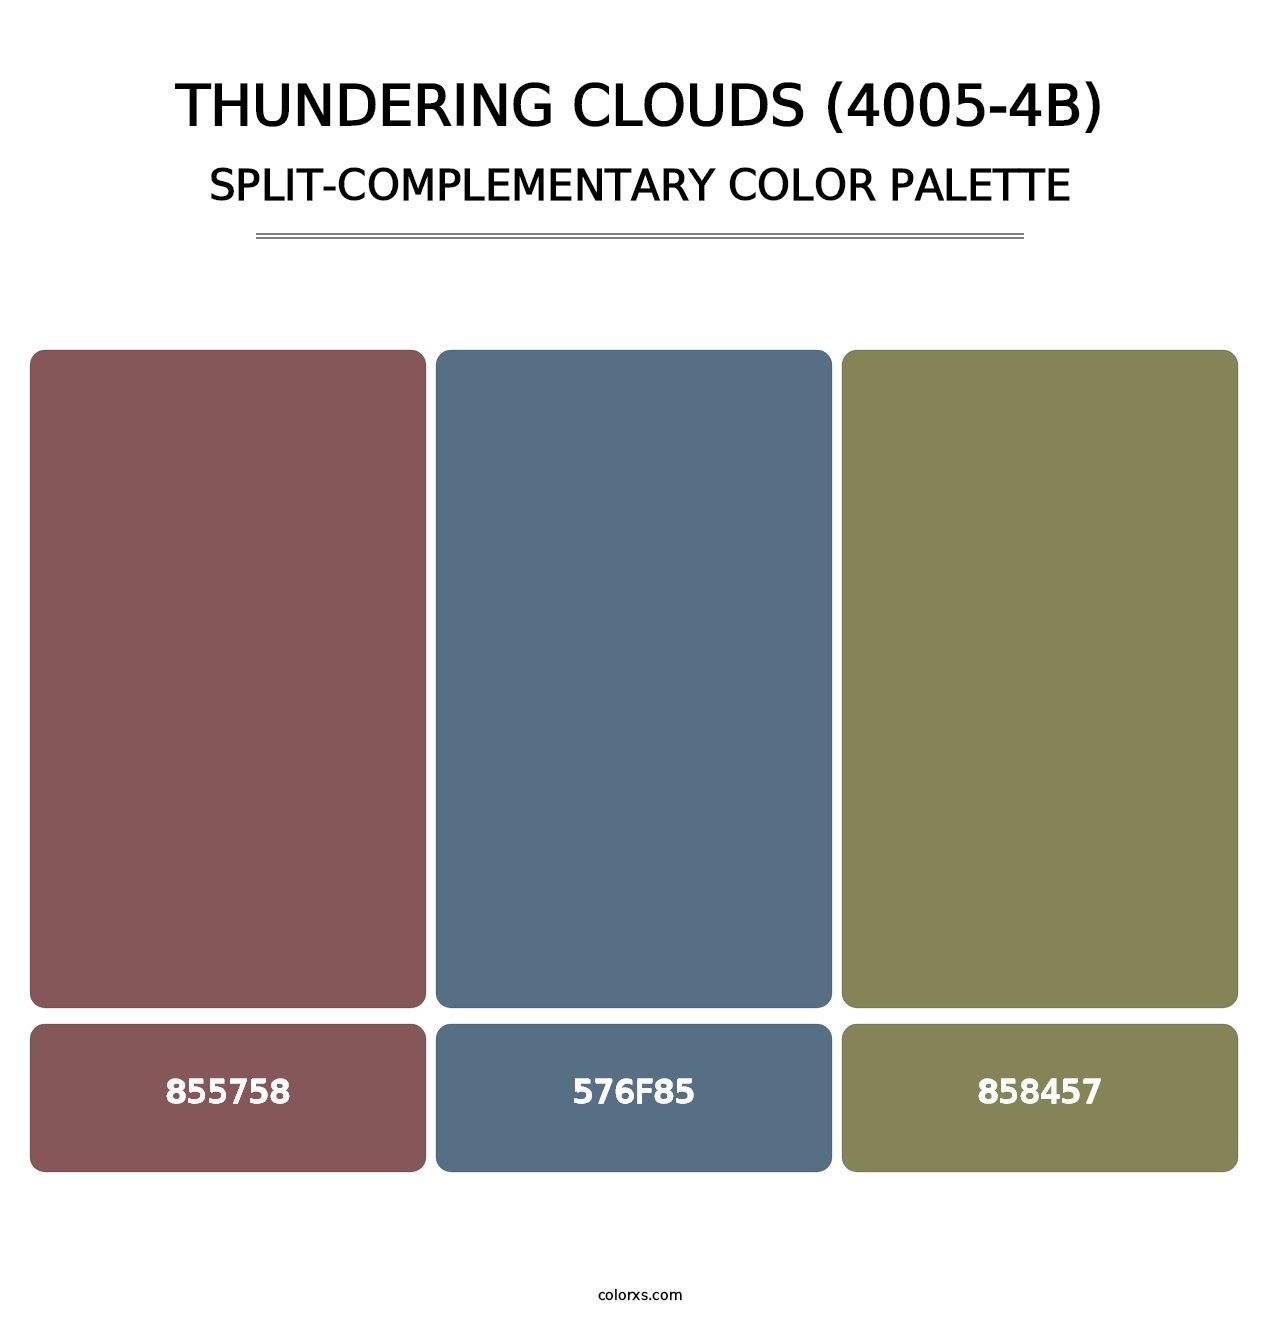 Thundering Clouds (4005-4B) - Split-Complementary Color Palette